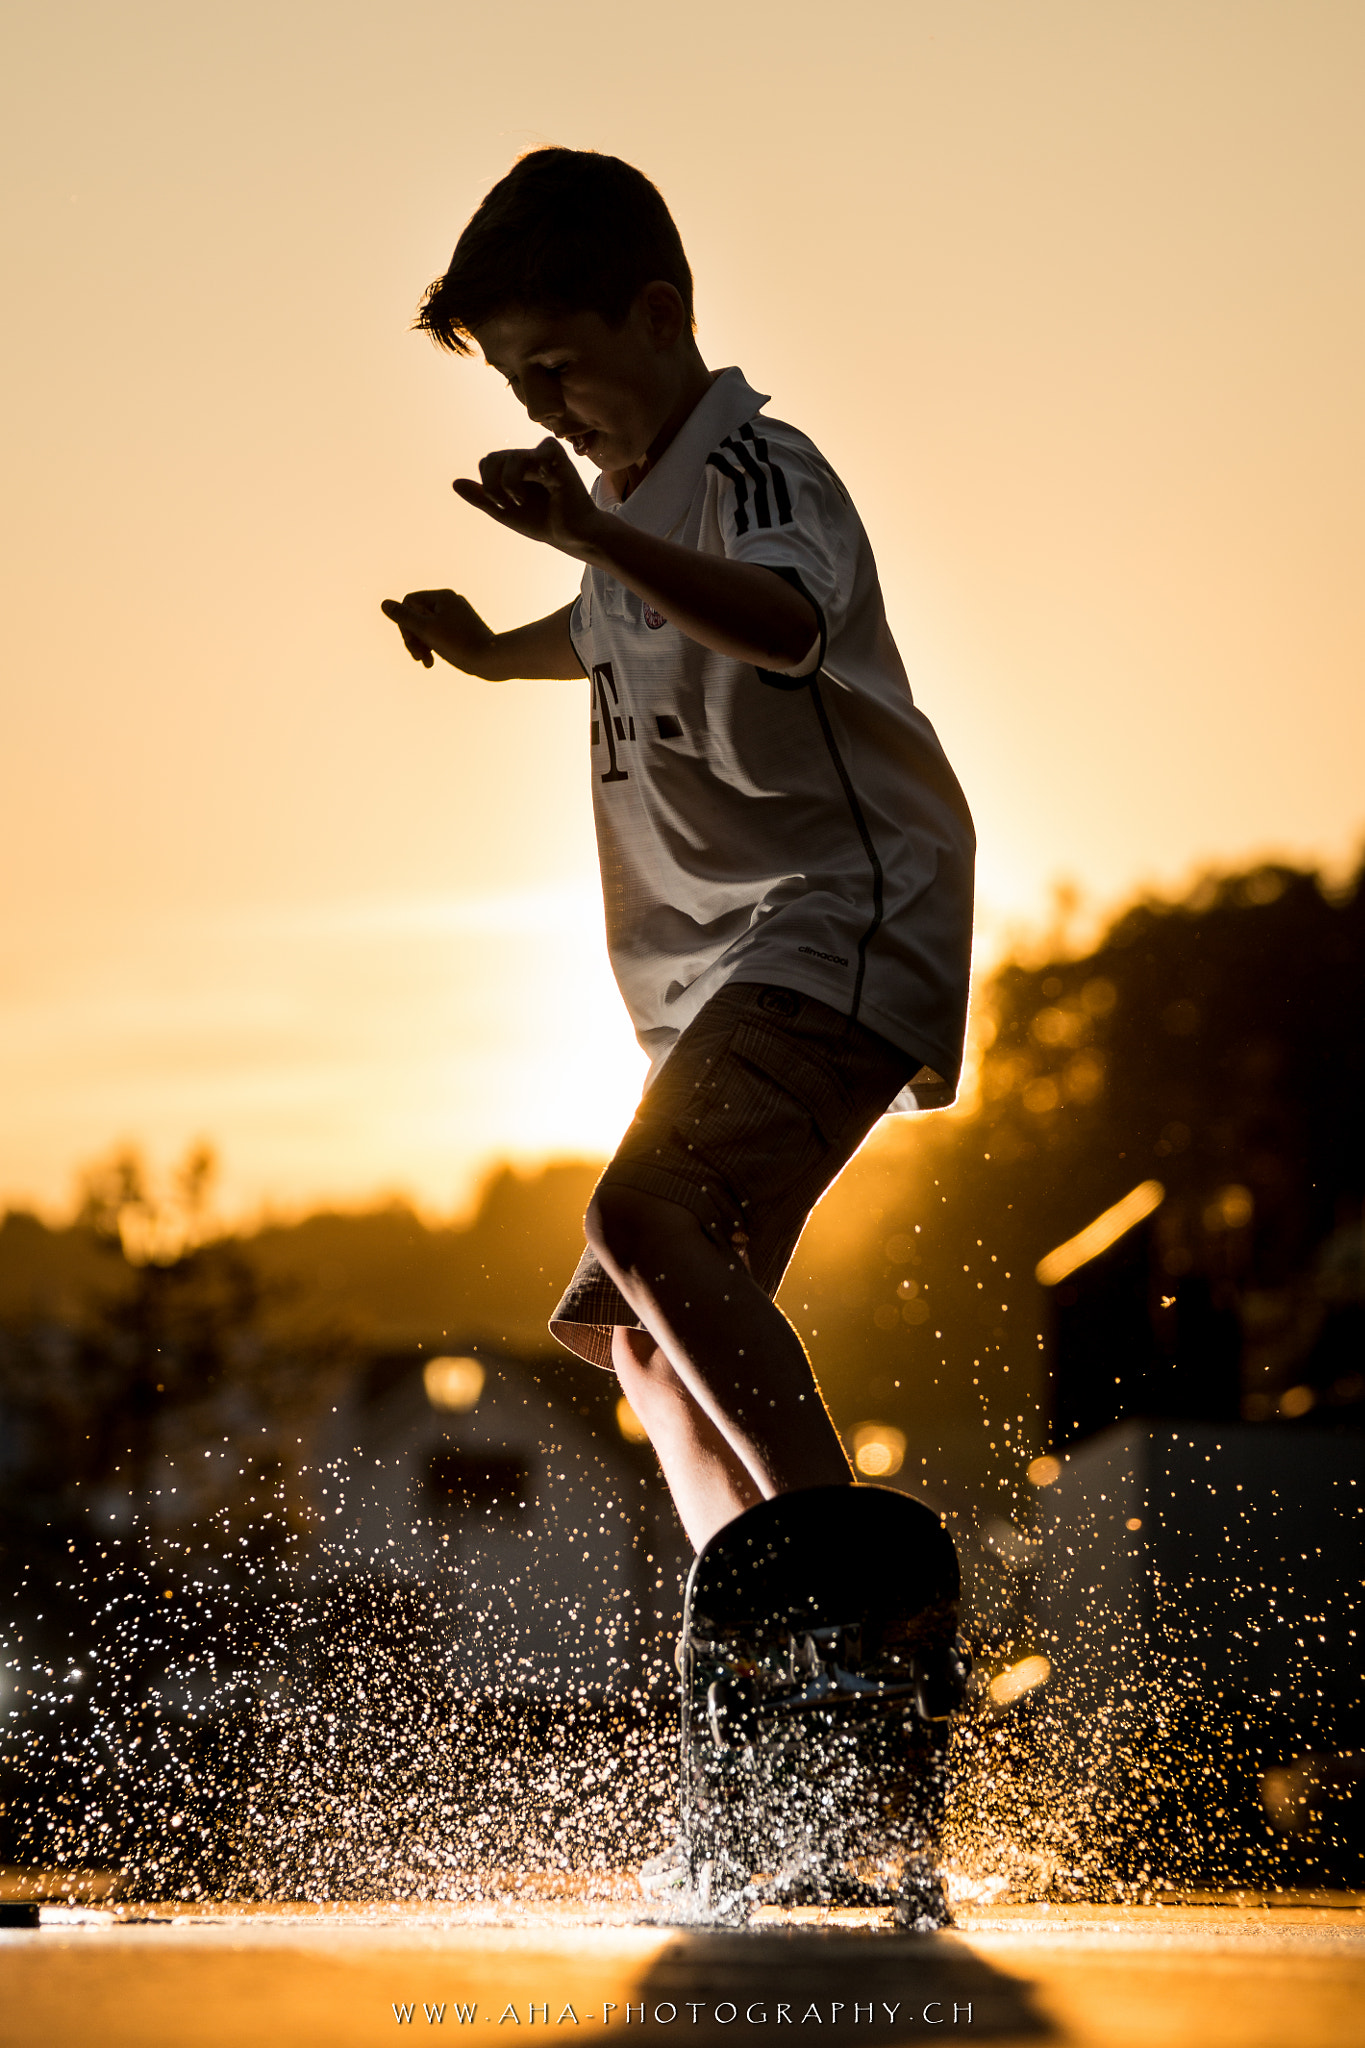 Sony a99 II + Sony 70-400mm F4-5.6 G SSM sample photo. Skateboarder playing with water photography